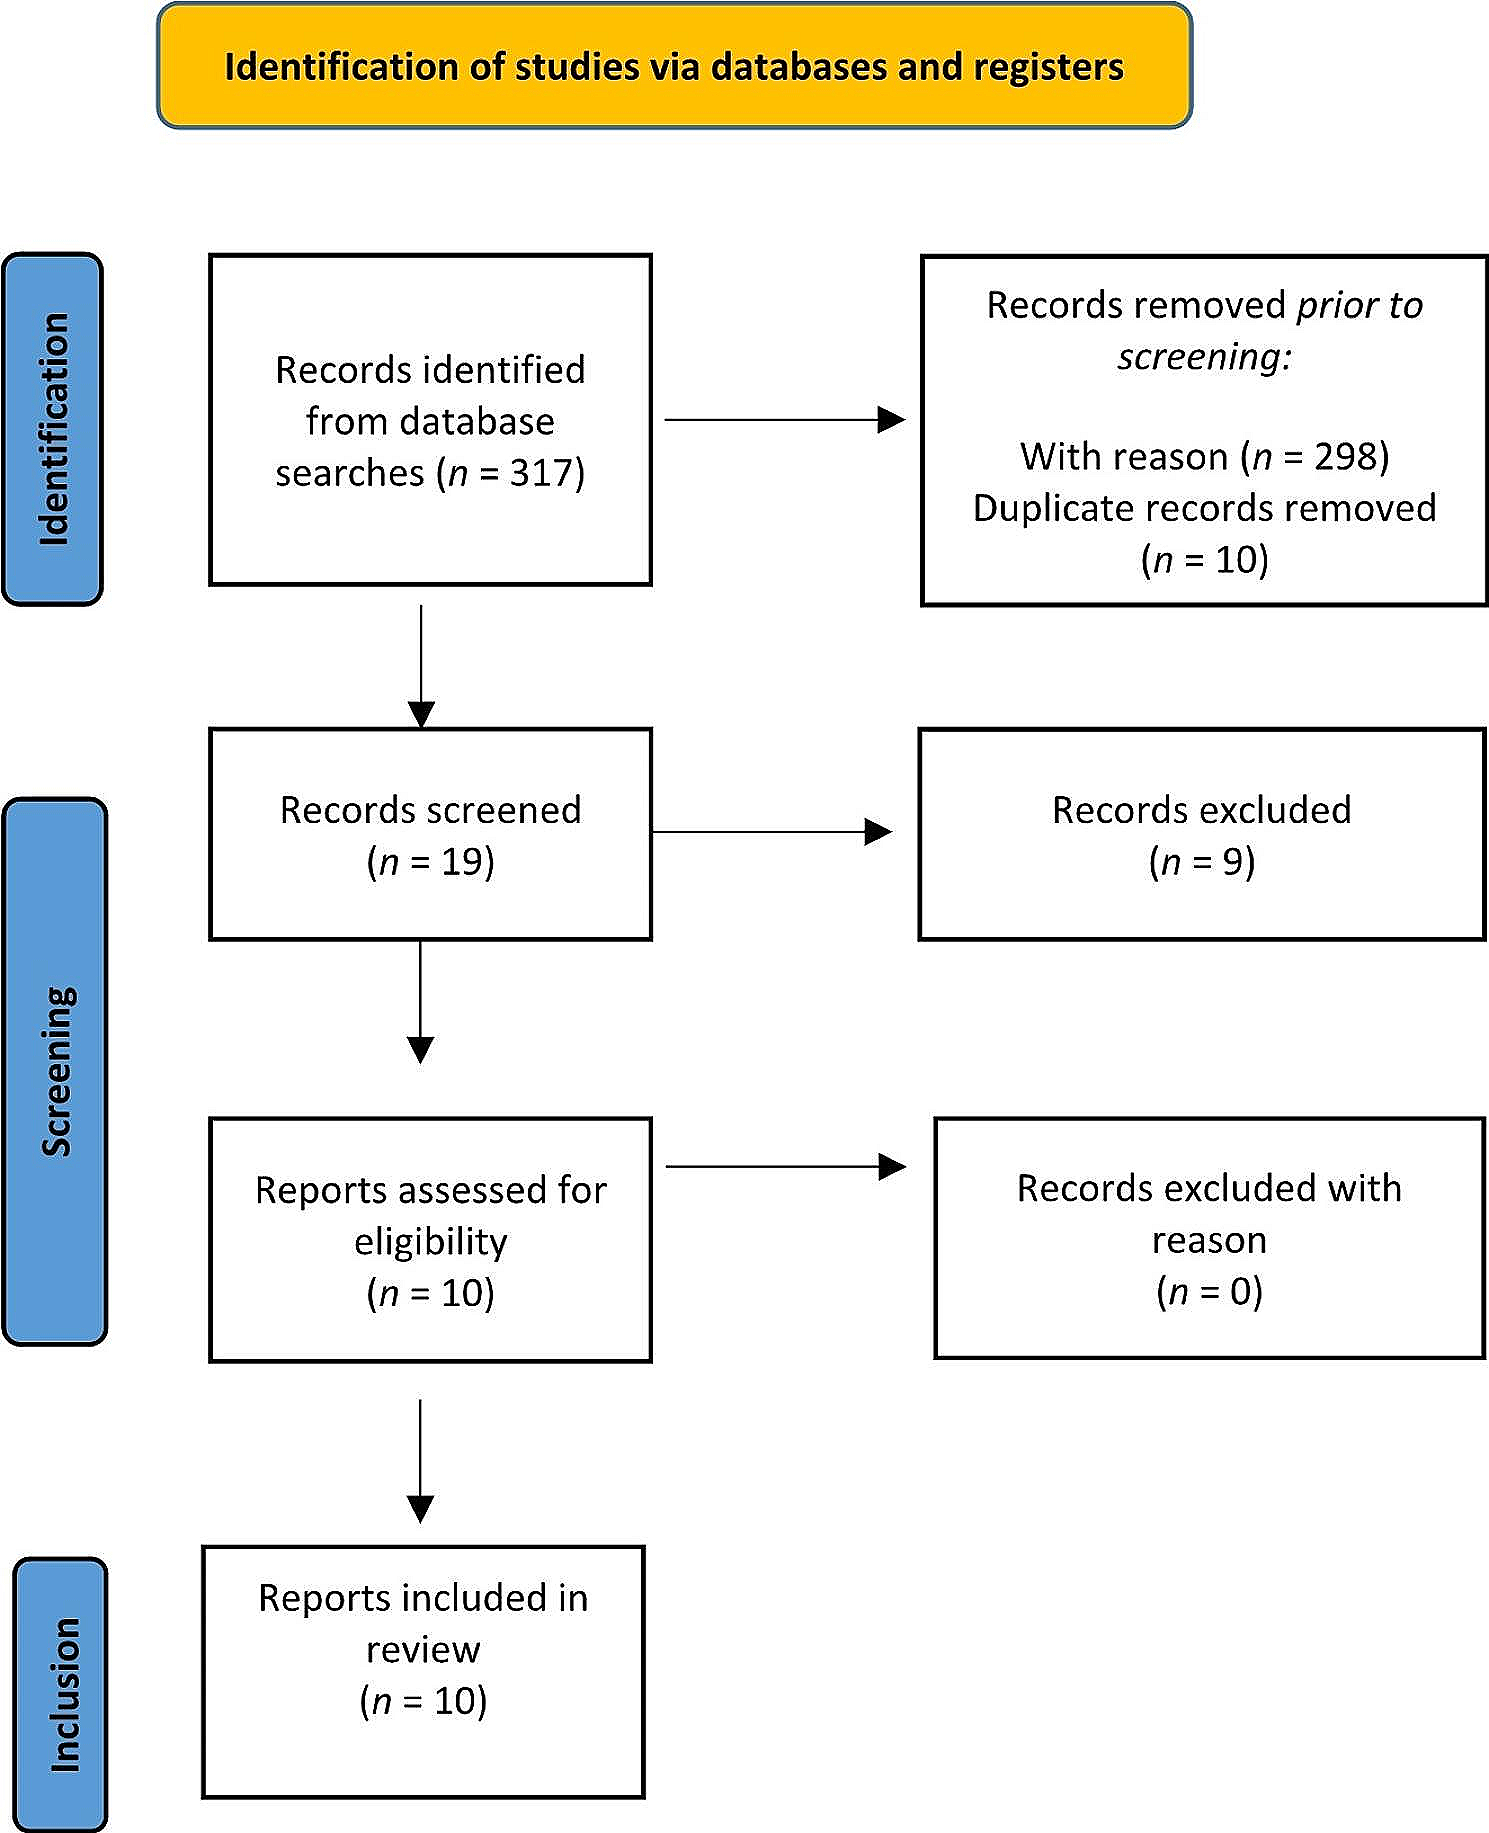 School refusal behavior in children and adolescents: a five-year narrative review of clinical significance and psychopathological profiles